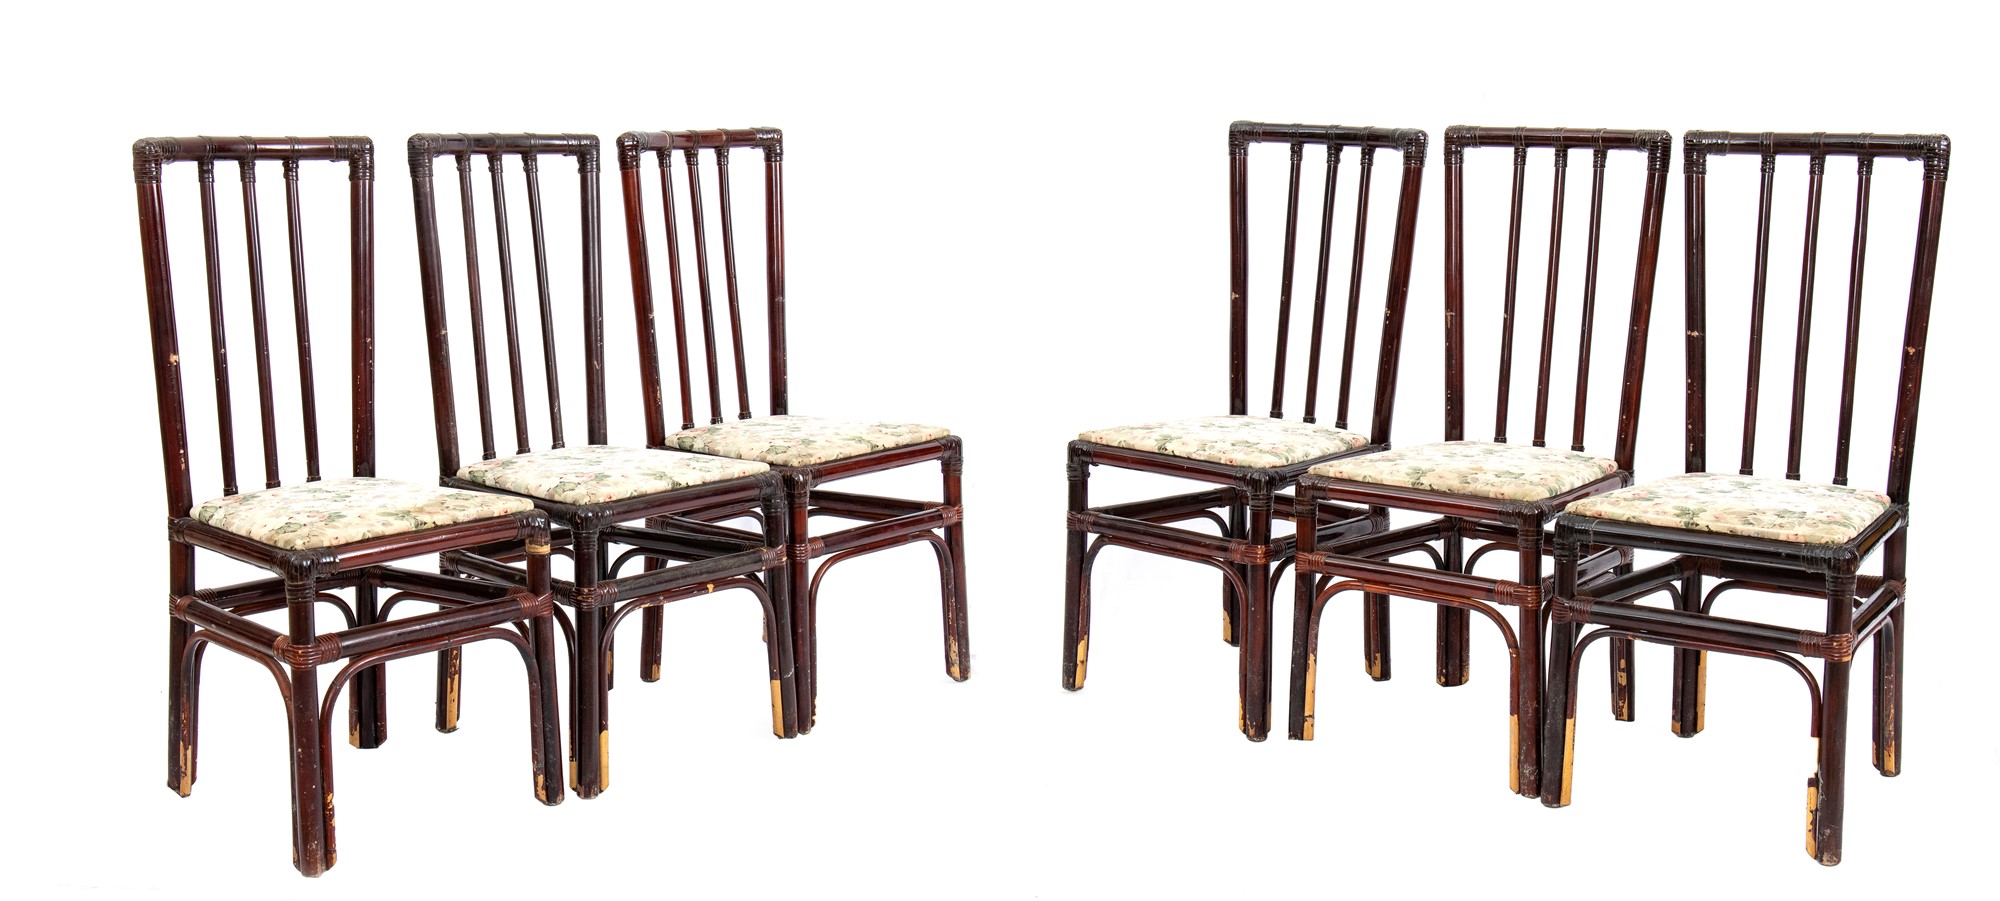 Six chairs with lacquered bamboo structure - Image 7 of 15